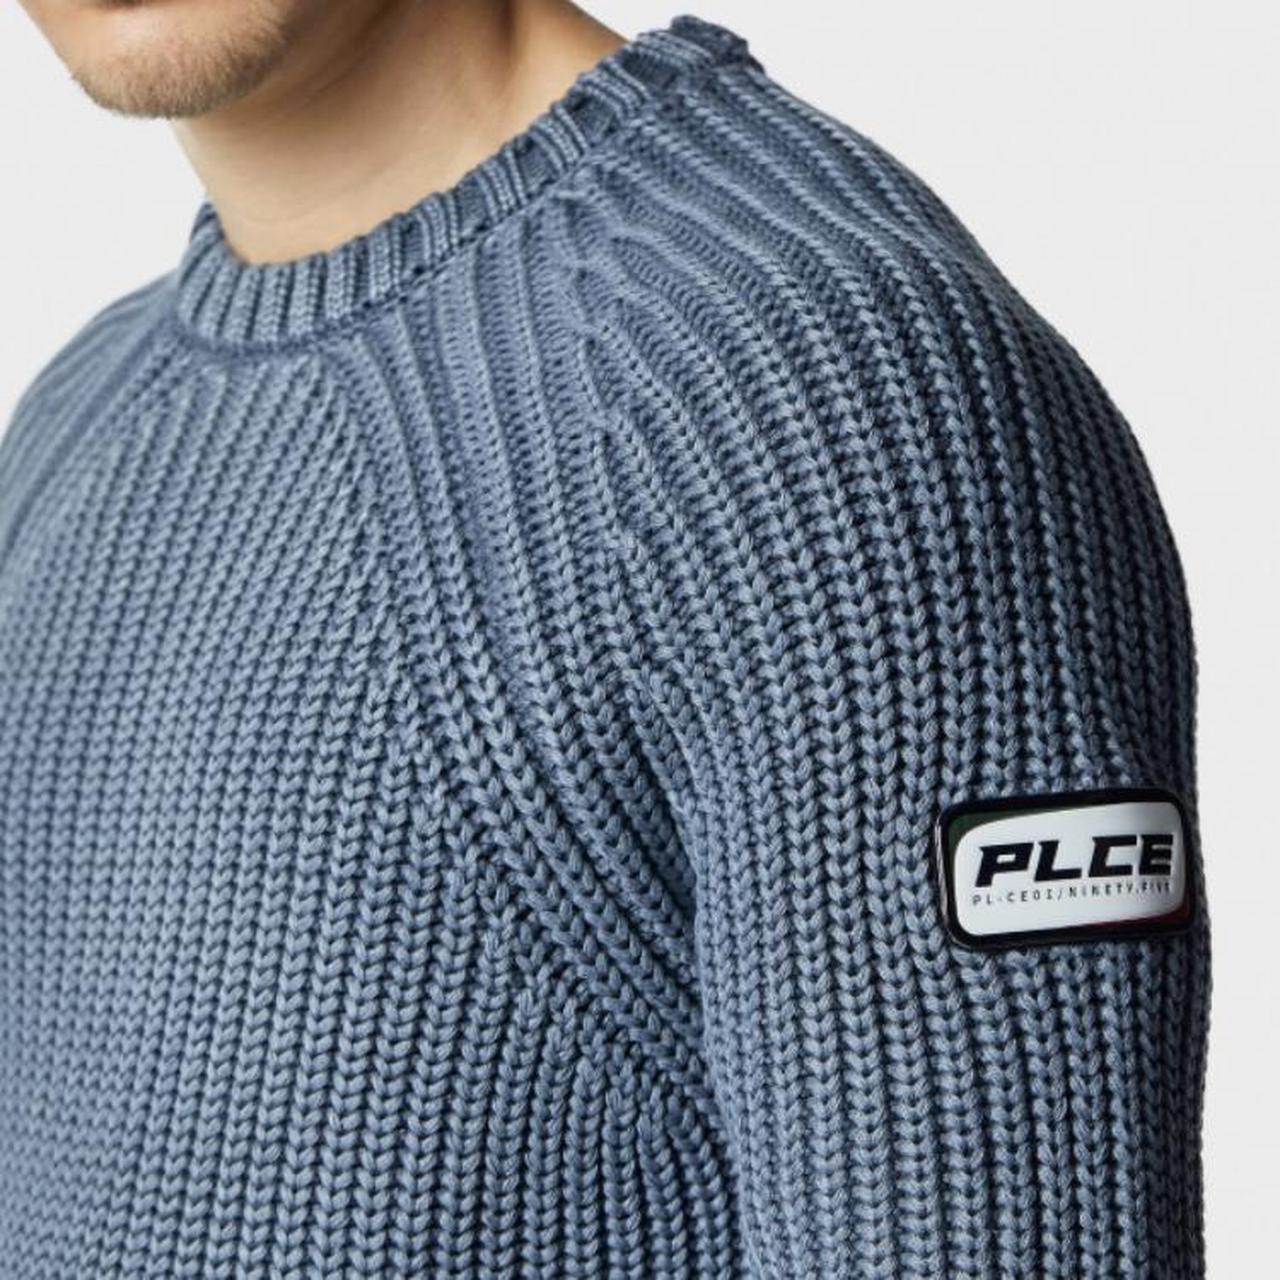 Product Image 4 - 883 POLICE

Winford Blue Knitwear

PLCE Winfold